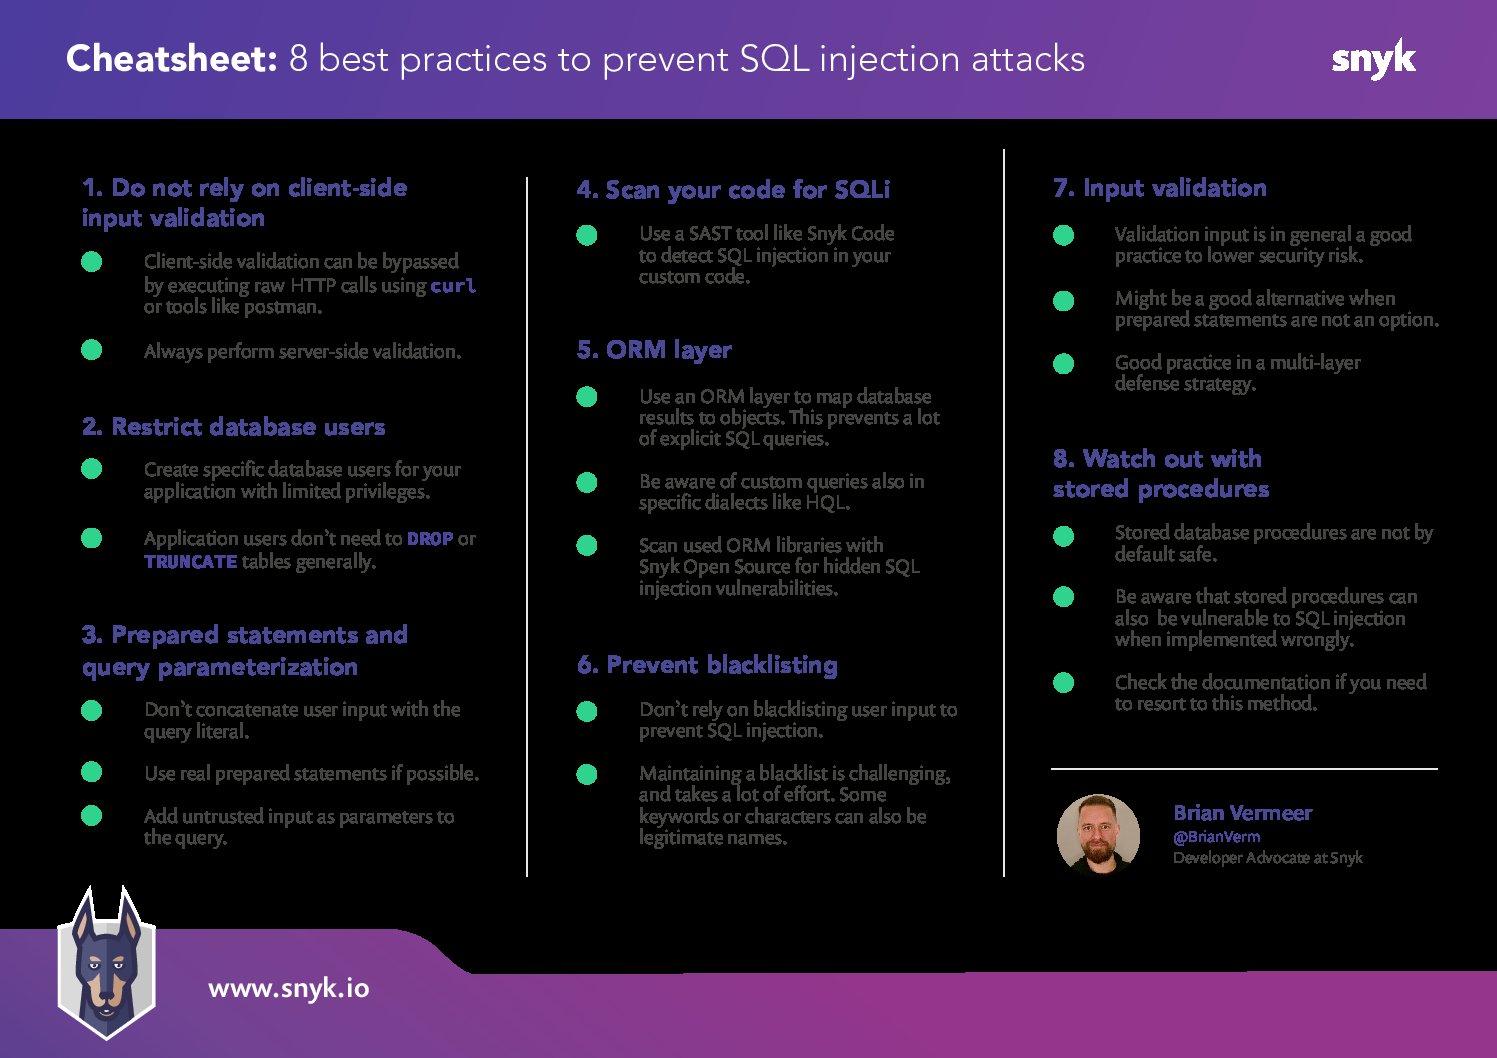 wordpress-sync/8-best-practices-to-prevent-SQL-injection-attacks-pdf